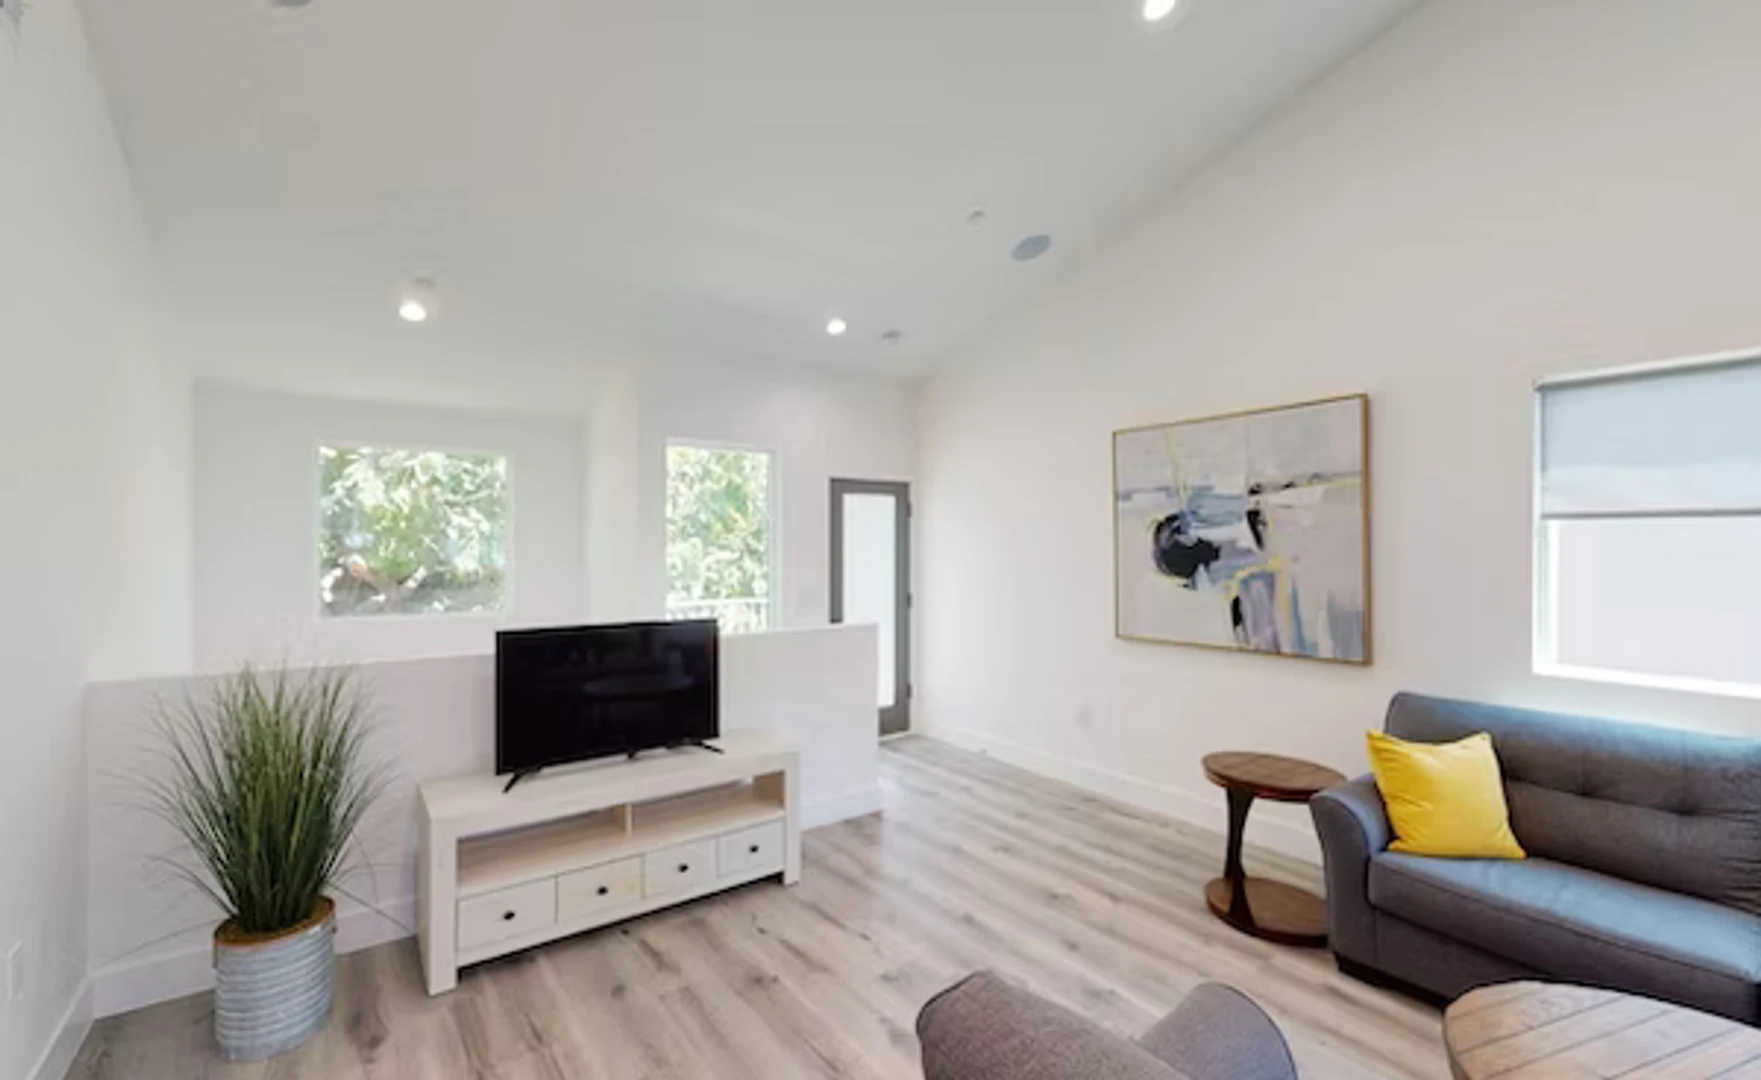 Cheap private room in Los Angeles